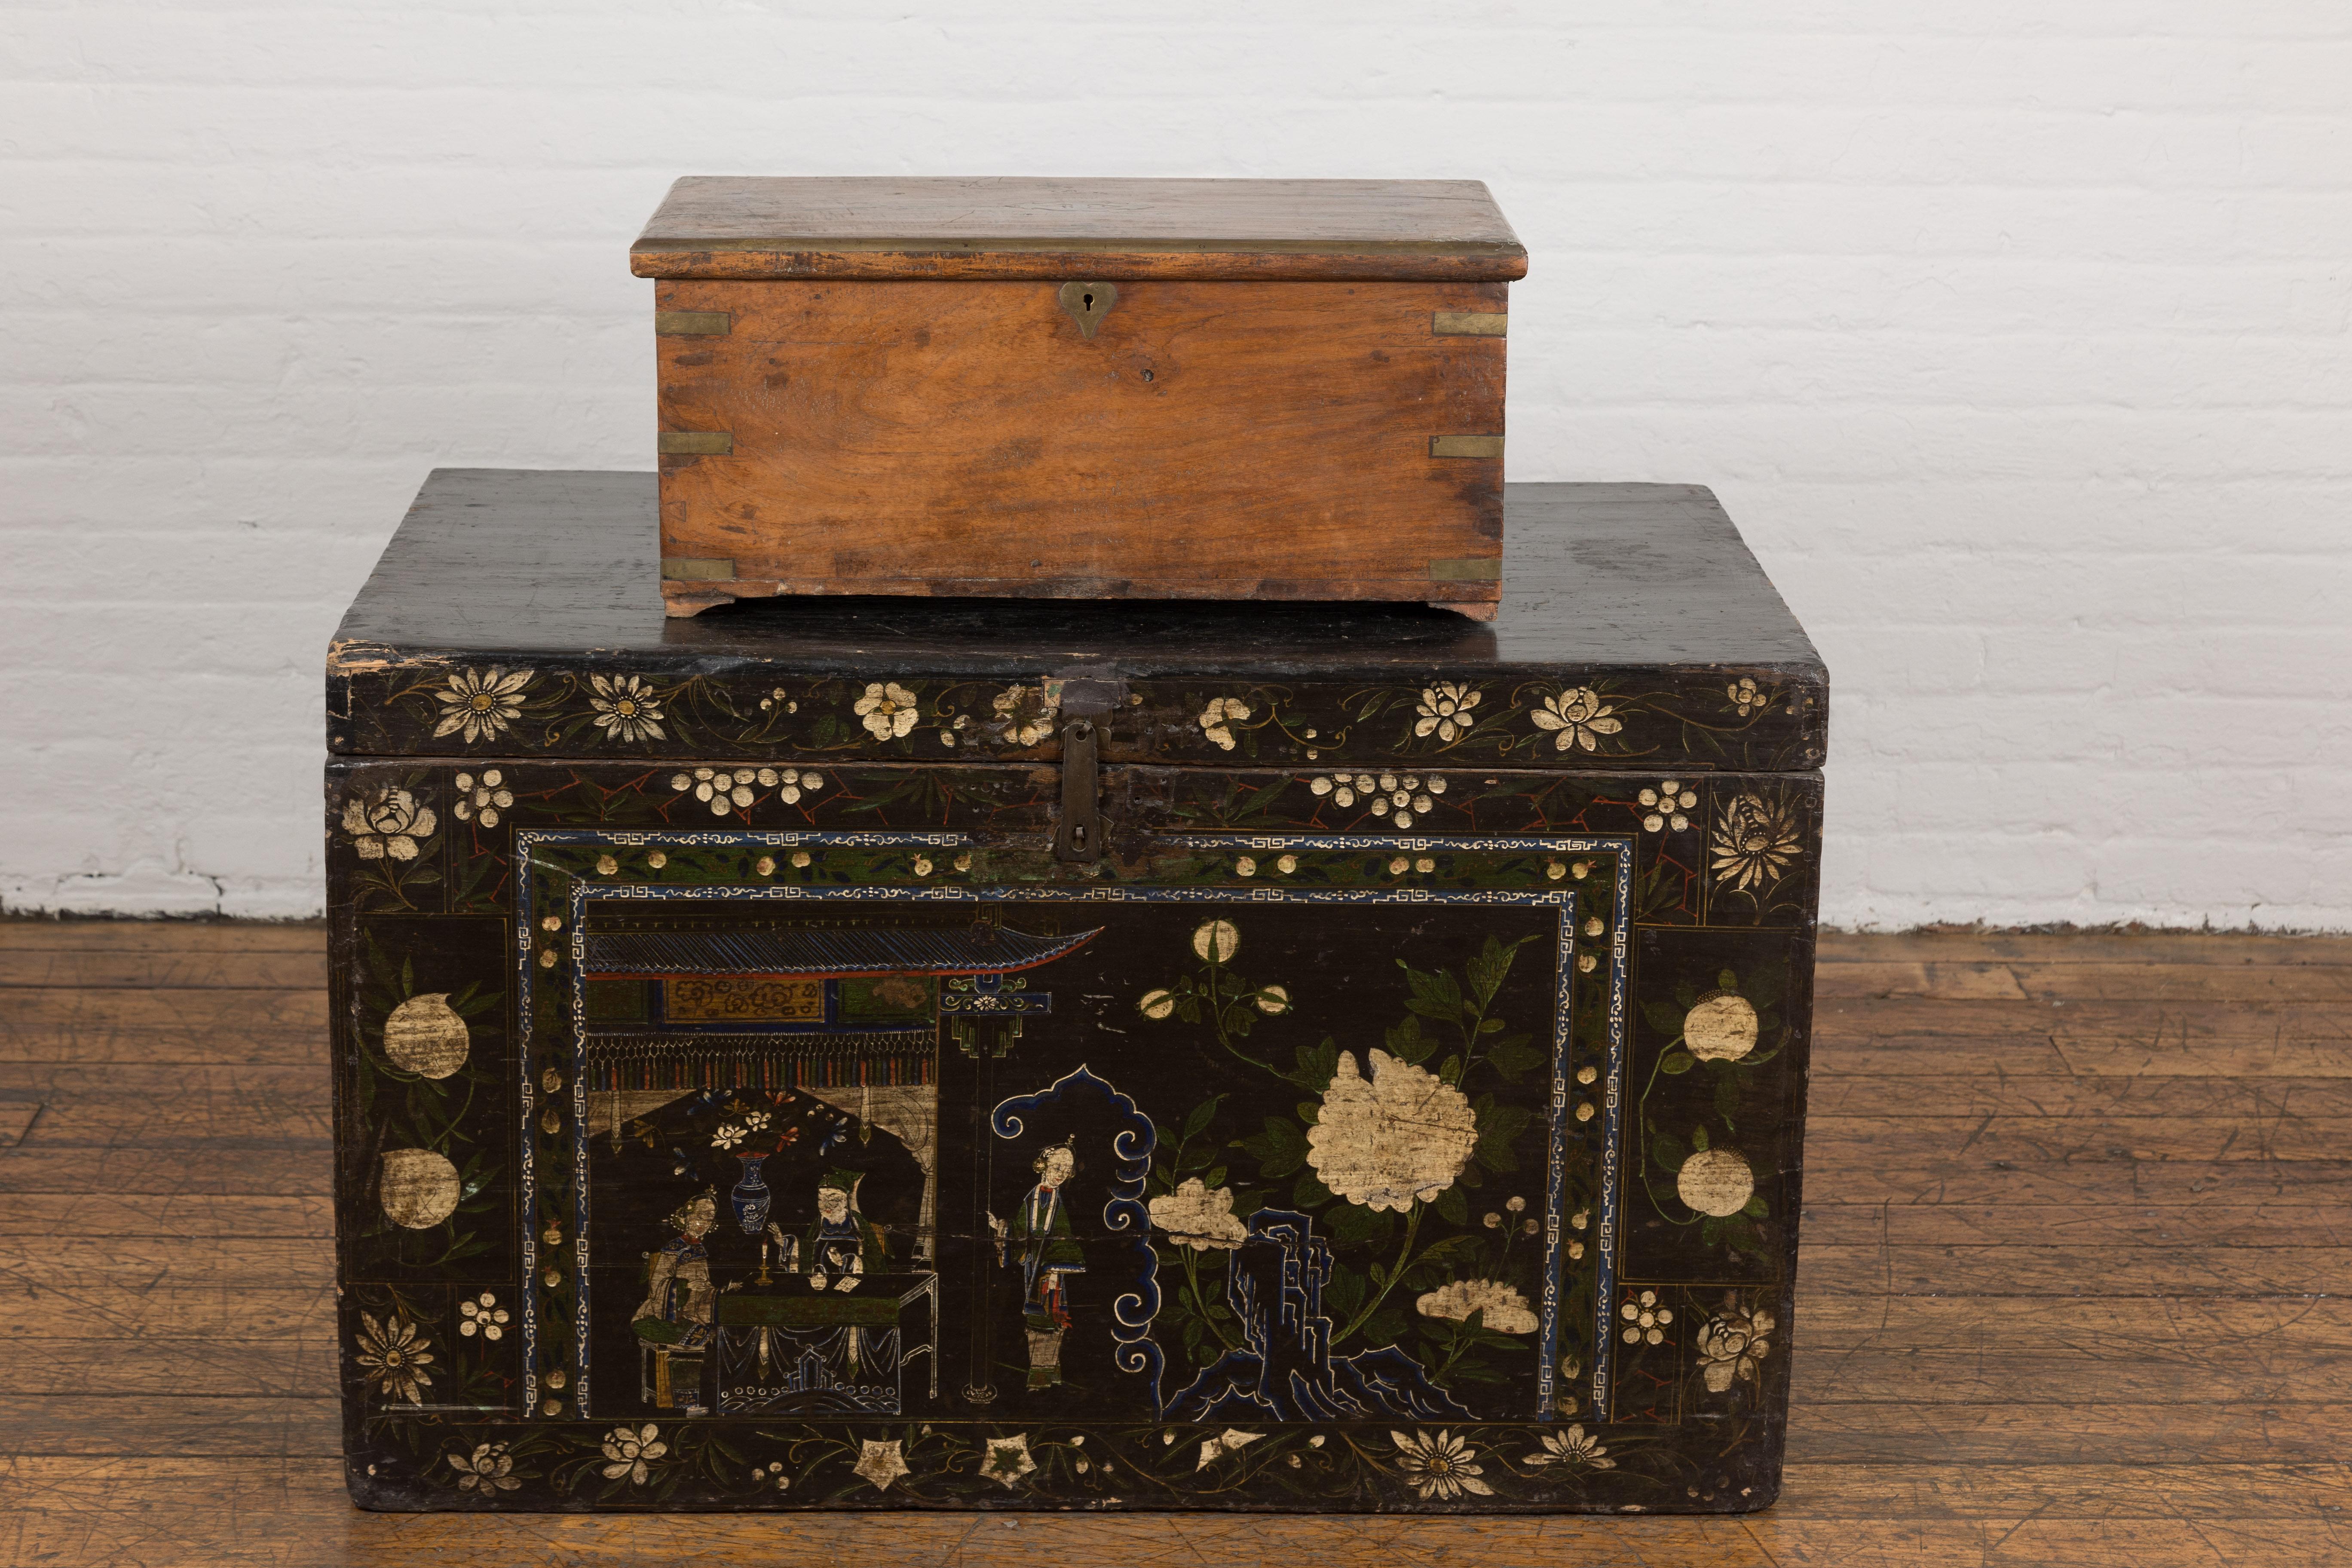 19th Century Rectangular Antique Wooden Storage Chest In Good Condition For Sale In Yonkers, NY